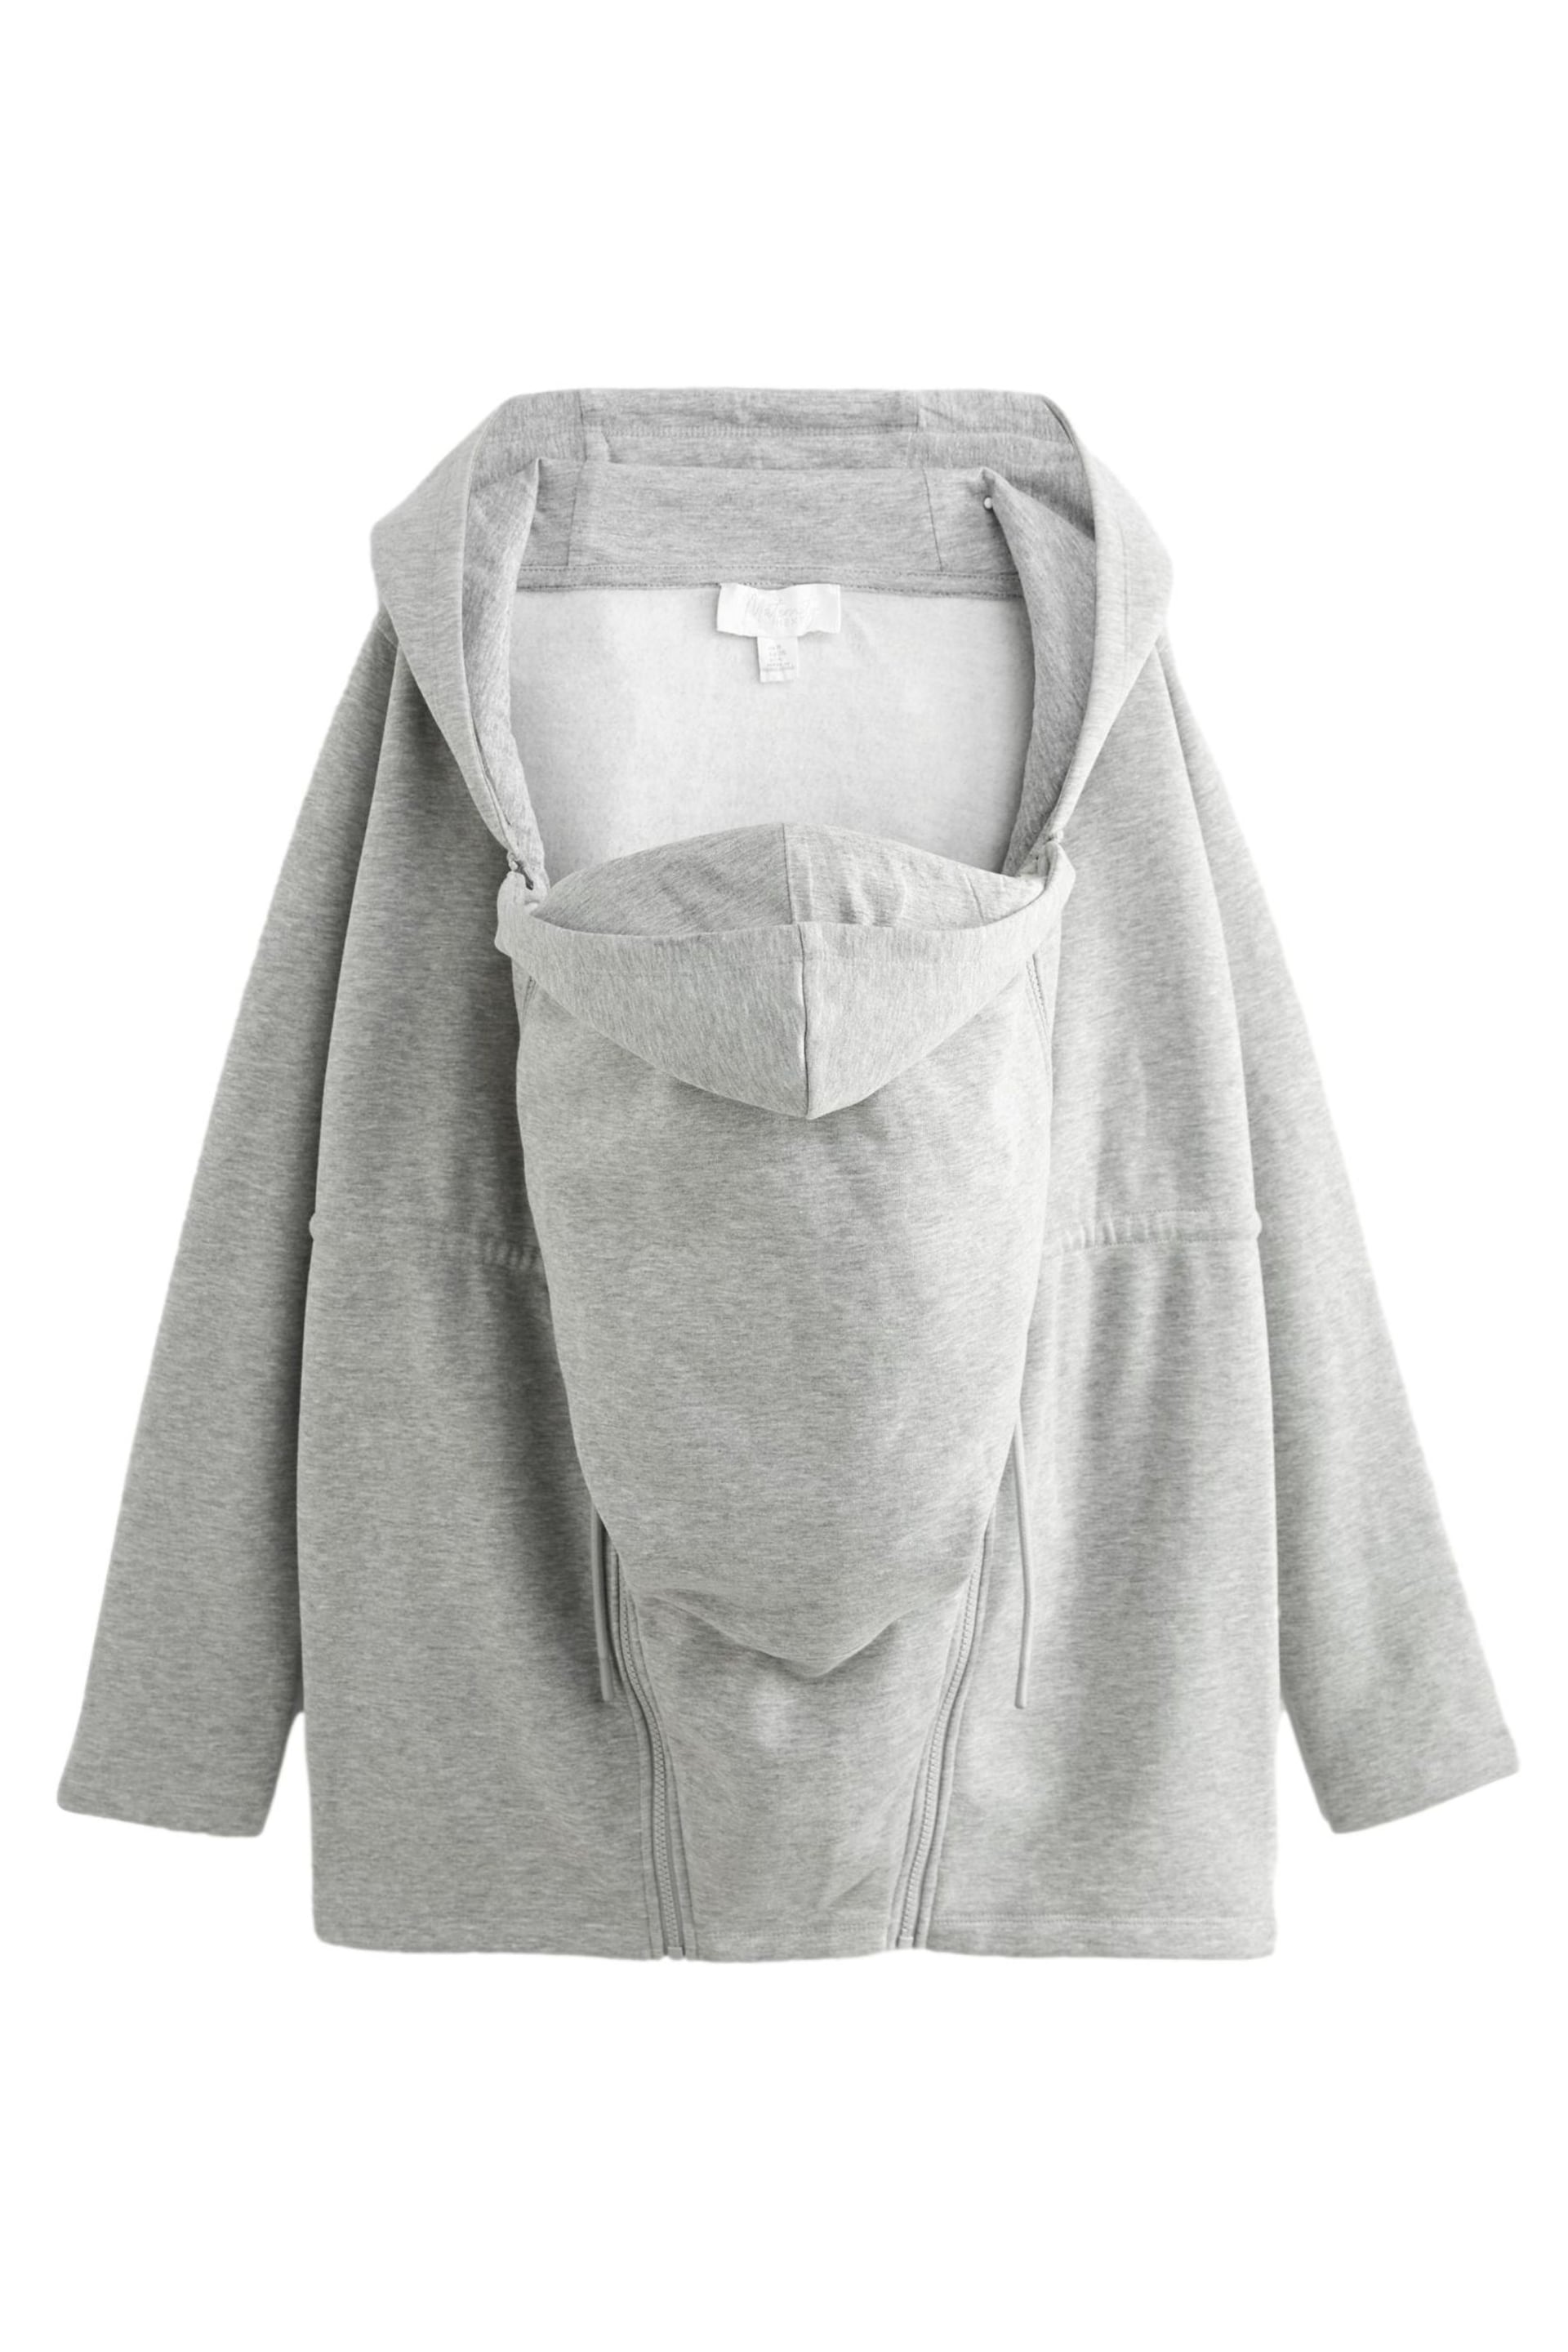 Grey Maternity 3-In-1 Hoodie with Baby Carrier Panel - Image 7 of 9